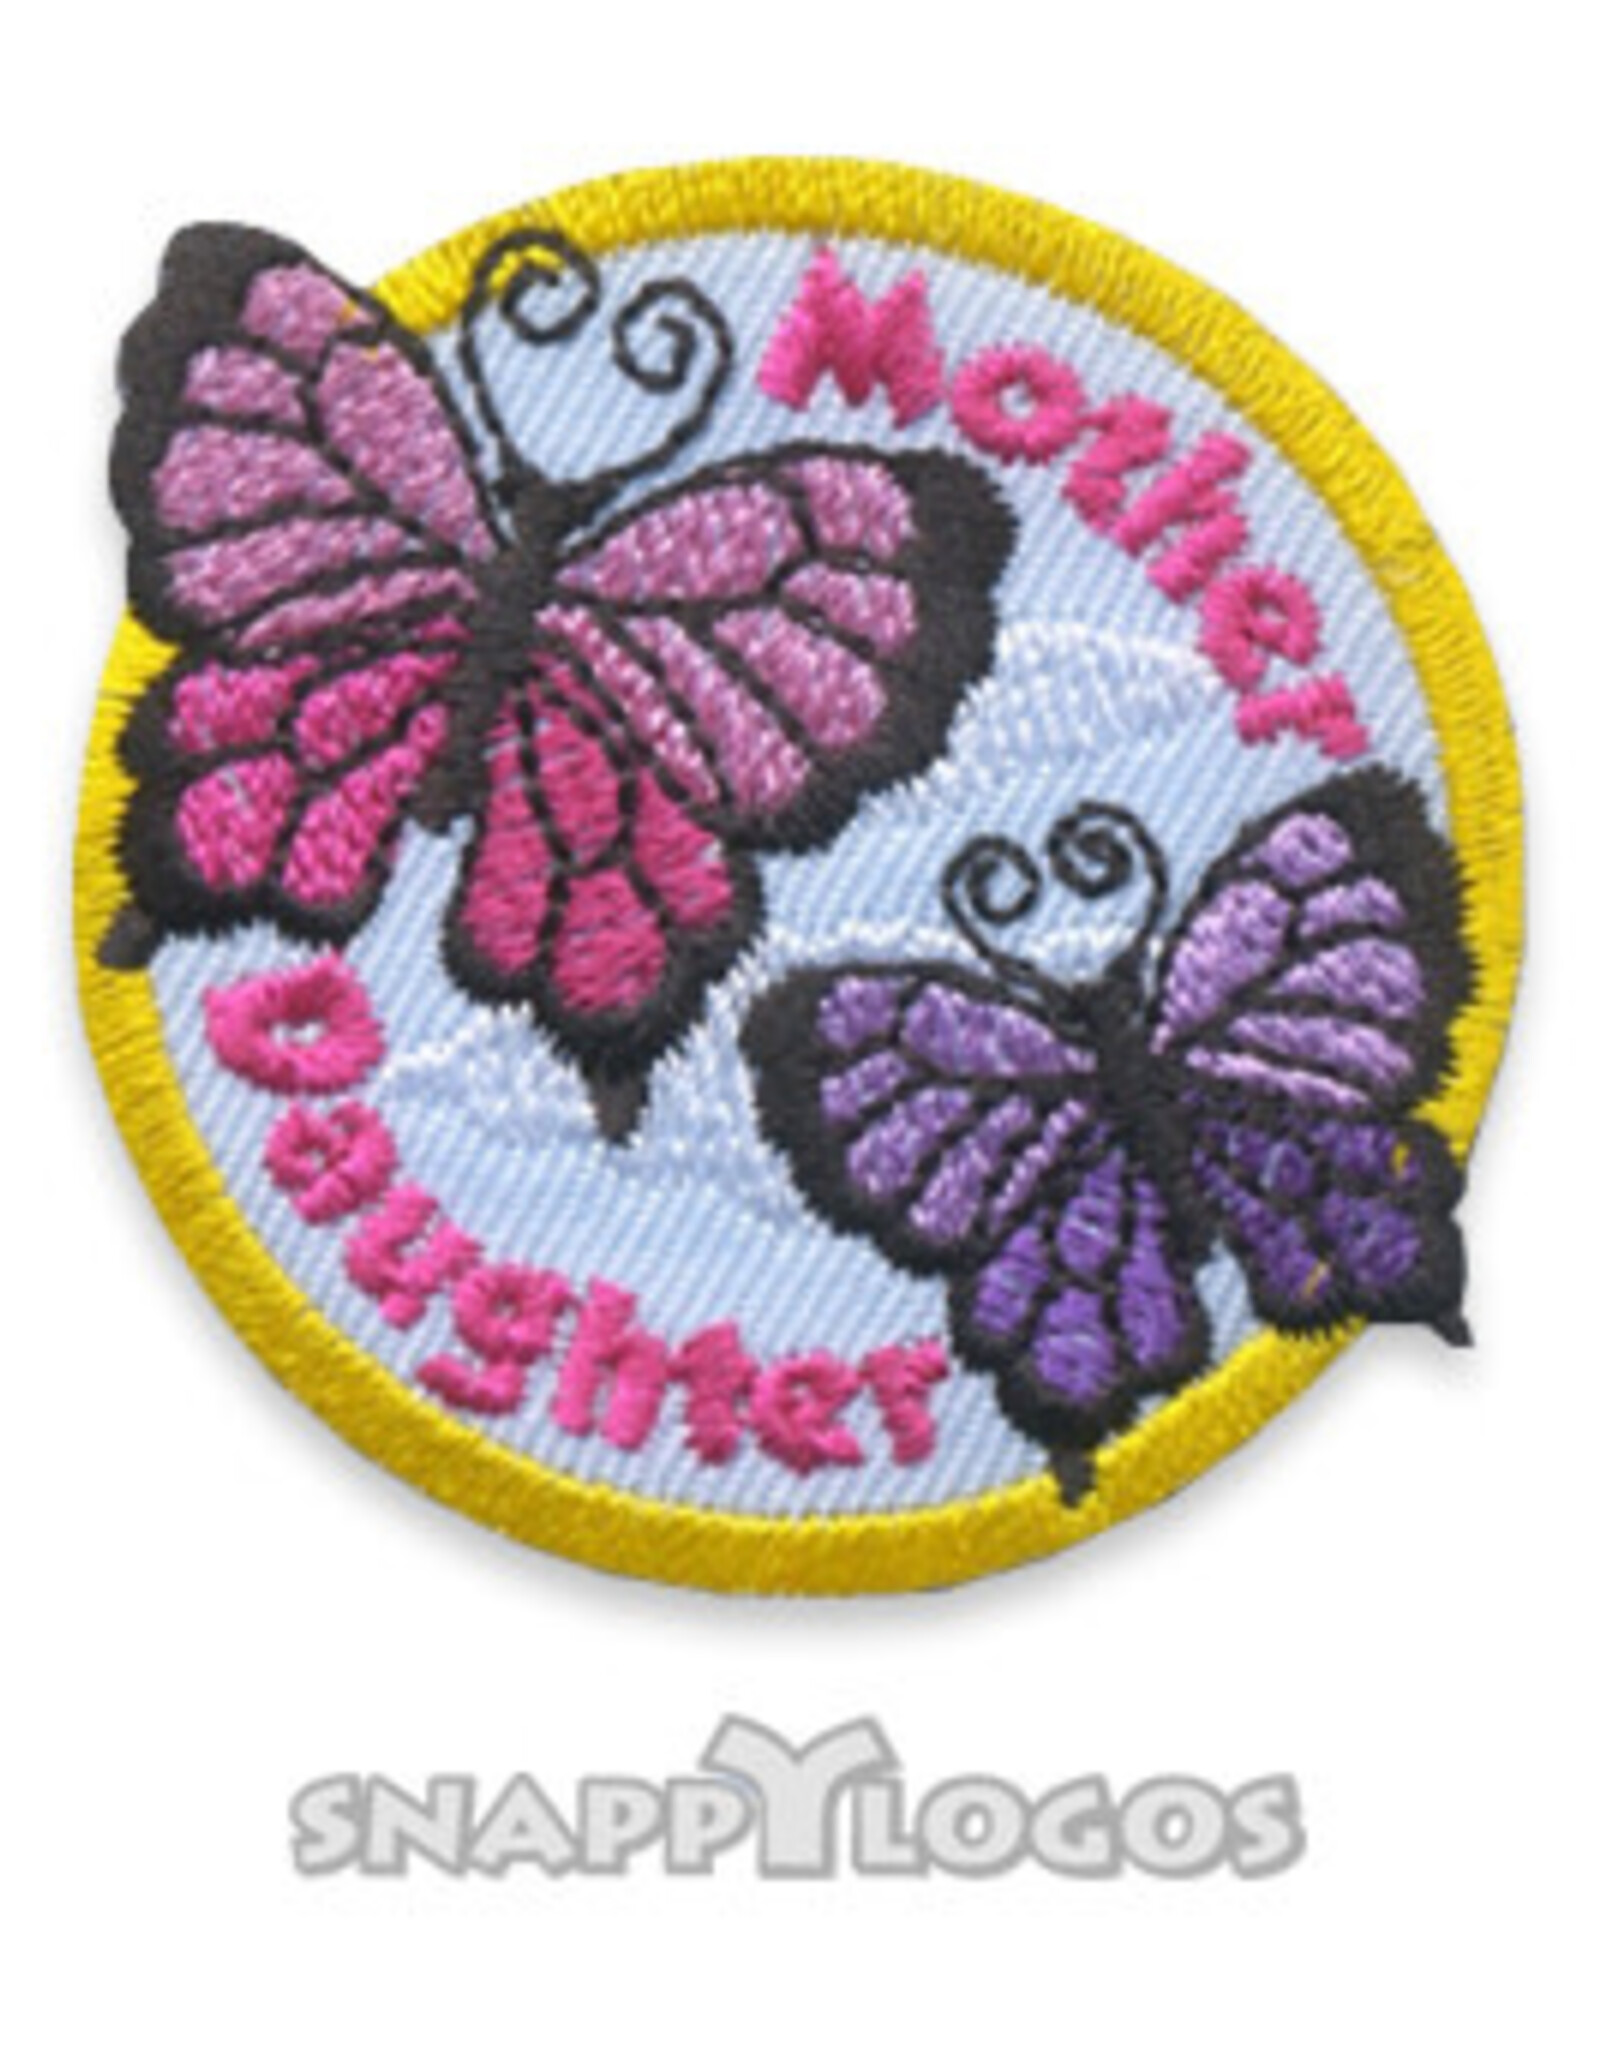 snappylogos Mother Daughter Butterfly Fun Patch (8495)